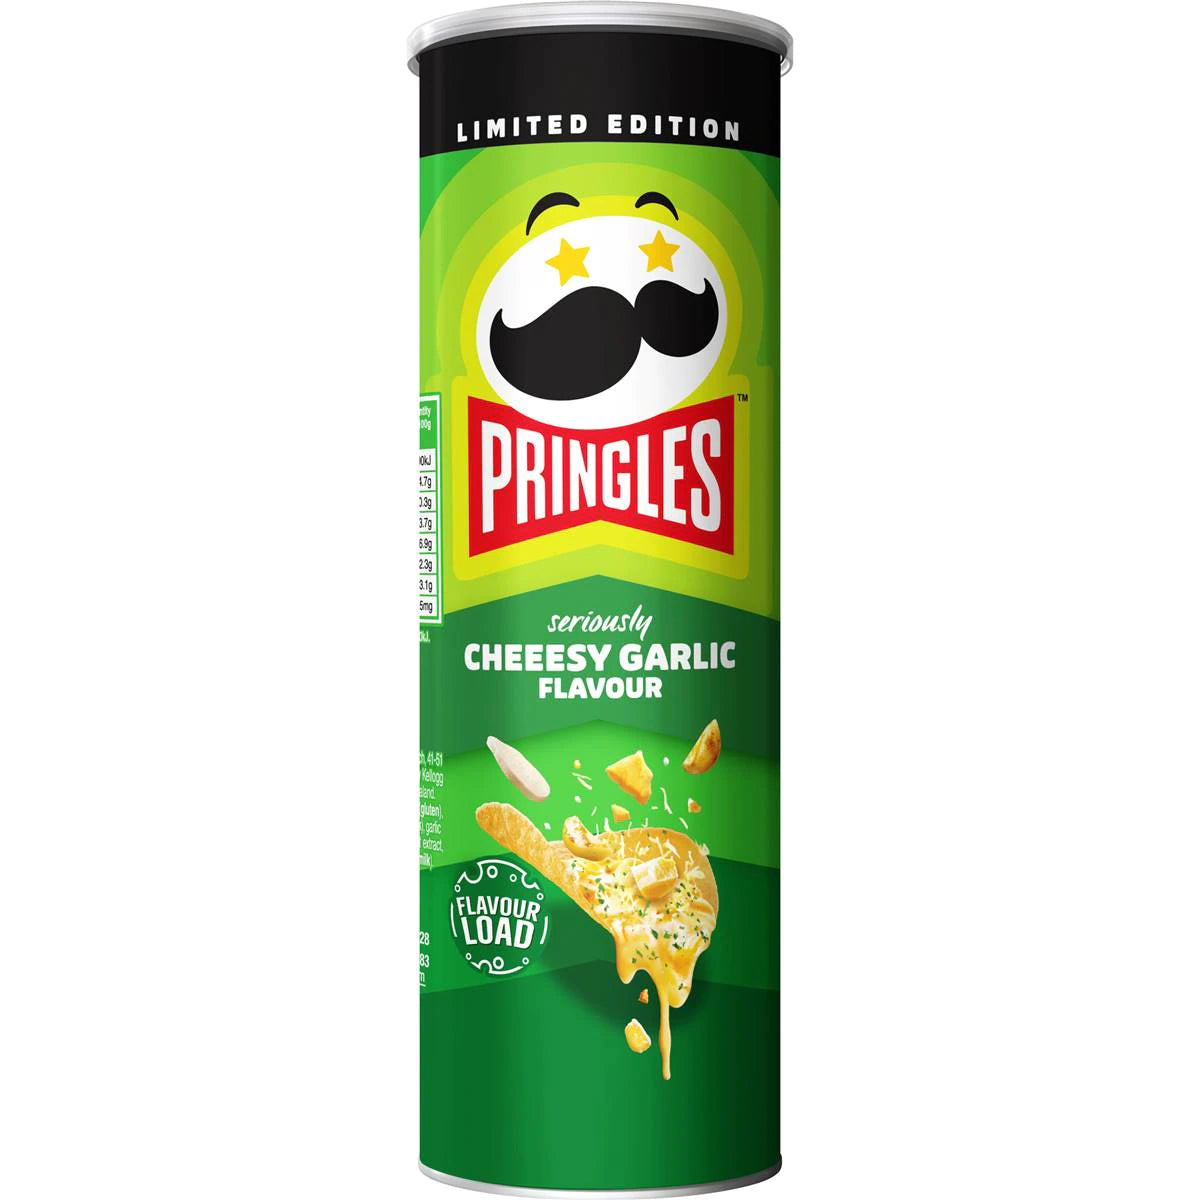 Pringles Seriously Cheeesy Garlic Flavour Potato Chips 118g